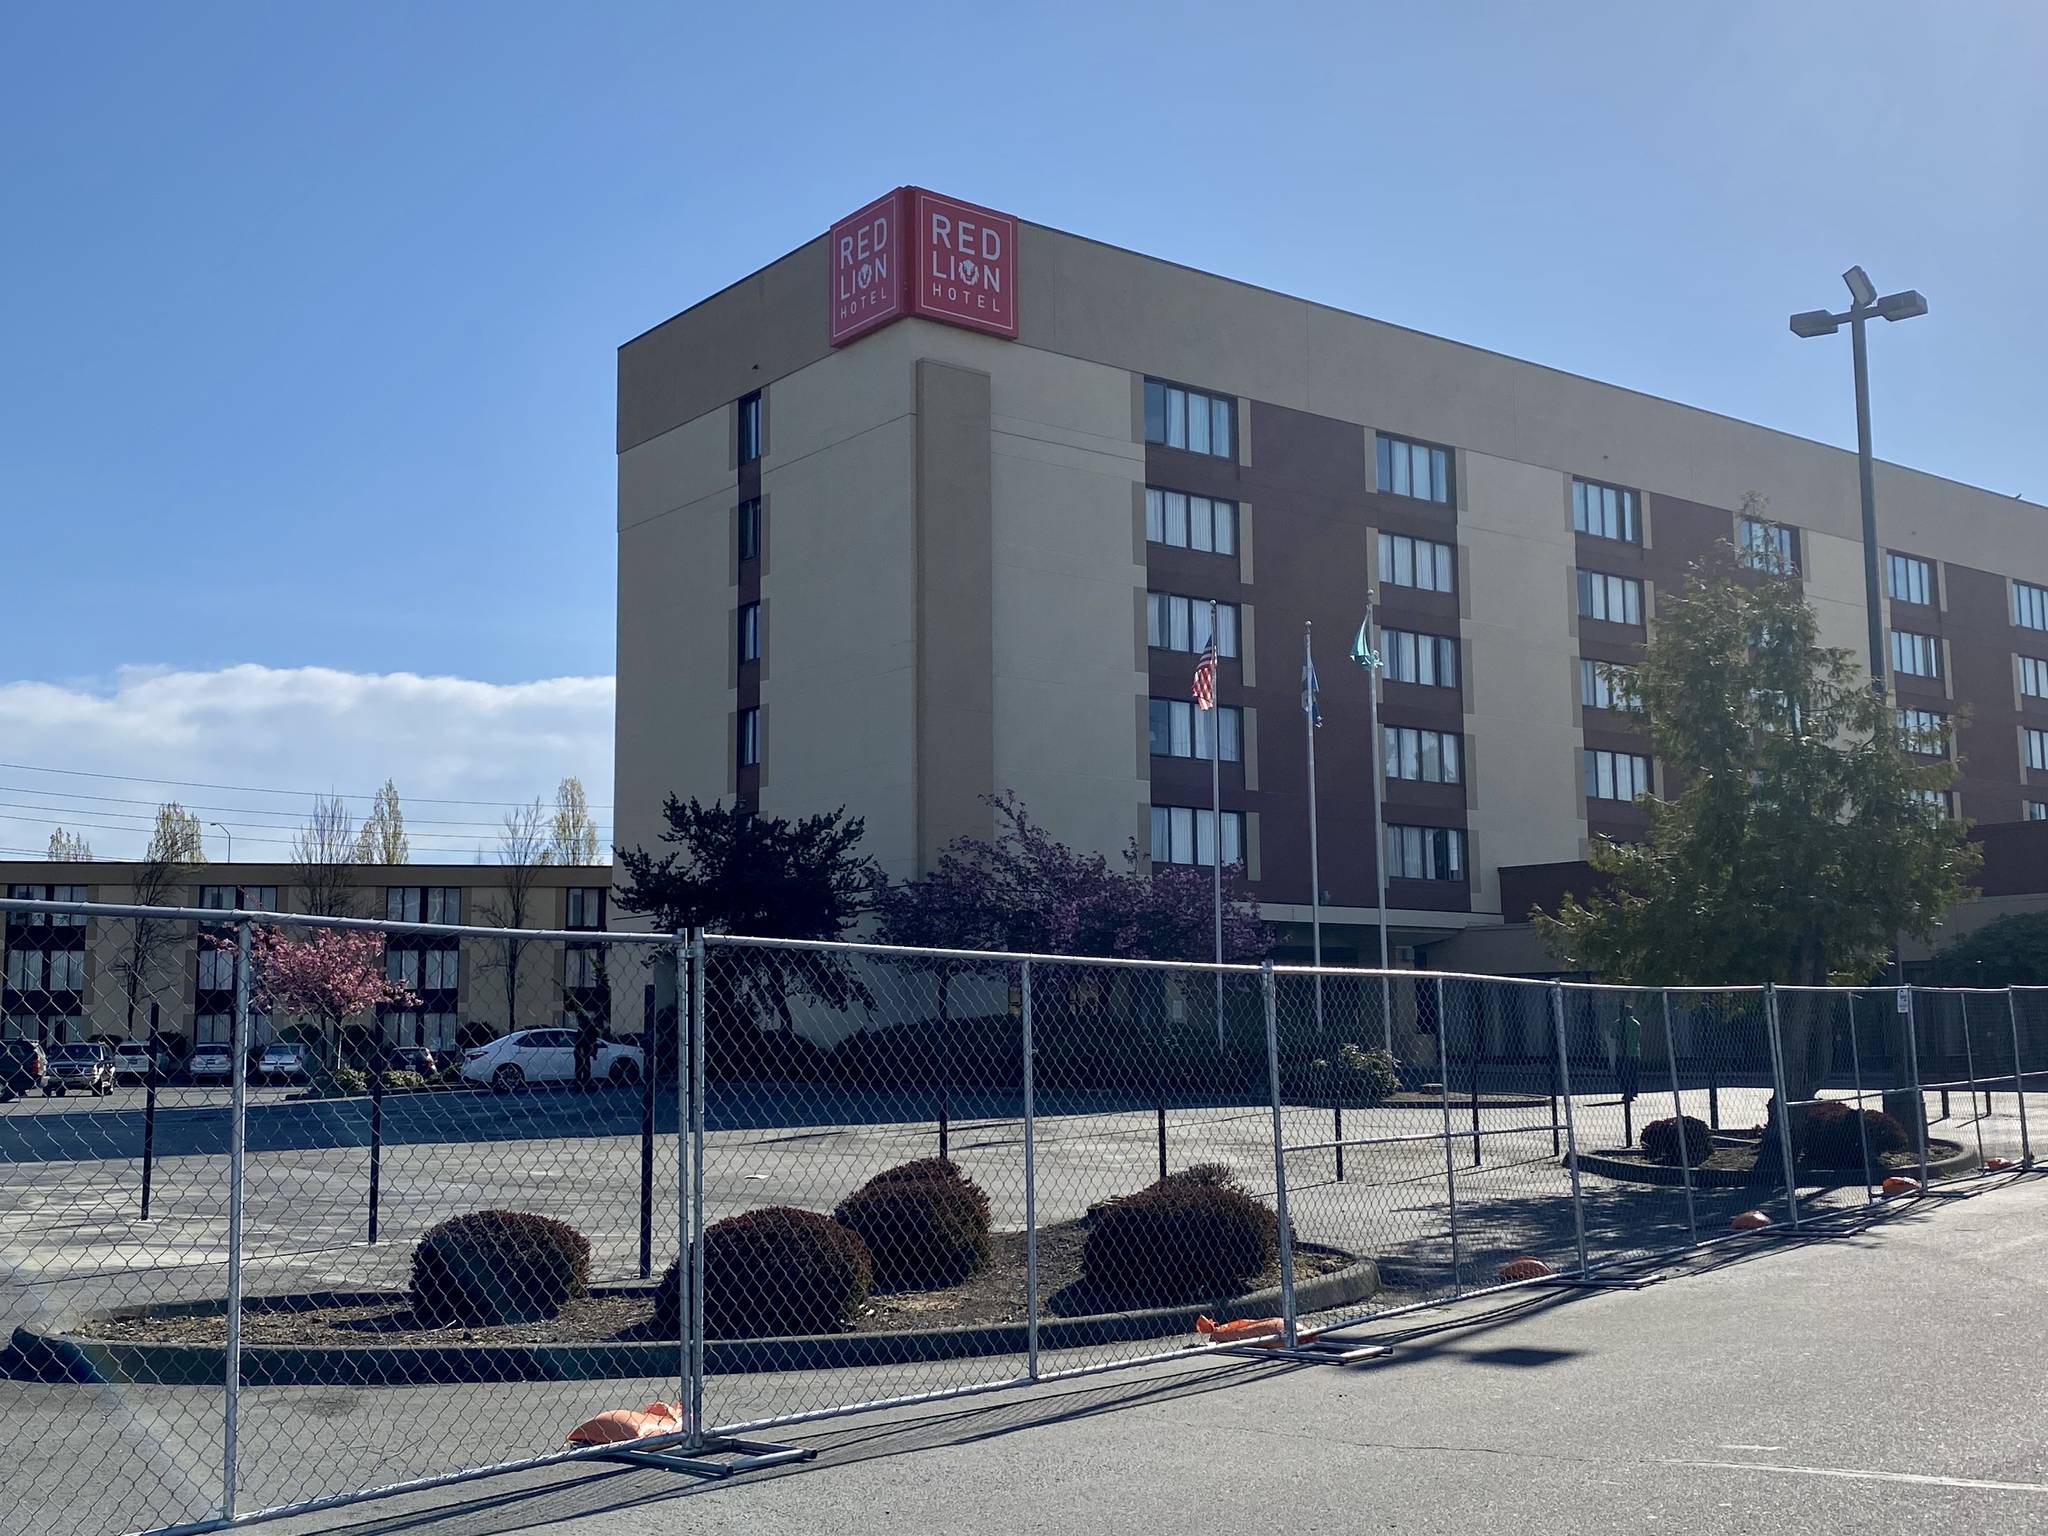 The Red Lion Inn at 1 South Grady Way in Renton is being used as temporary site to relocate individuals experiencing homelessness during the COVID-19 pandemic. Olivia Sullivan/staff photo